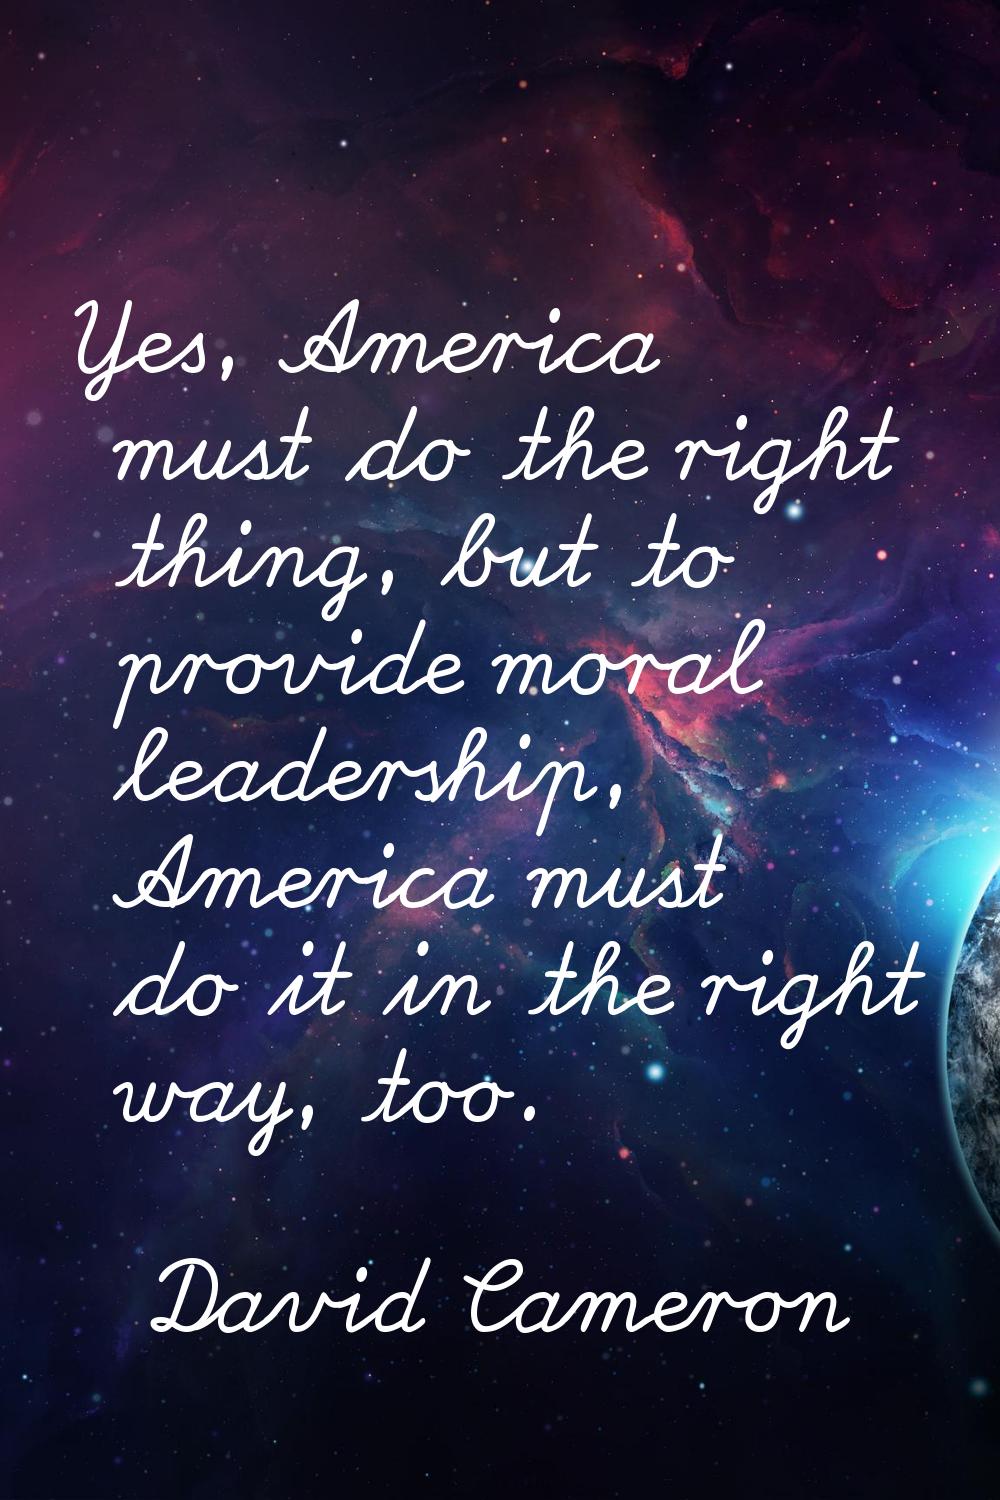 Yes, America must do the right thing, but to provide moral leadership, America must do it in the ri